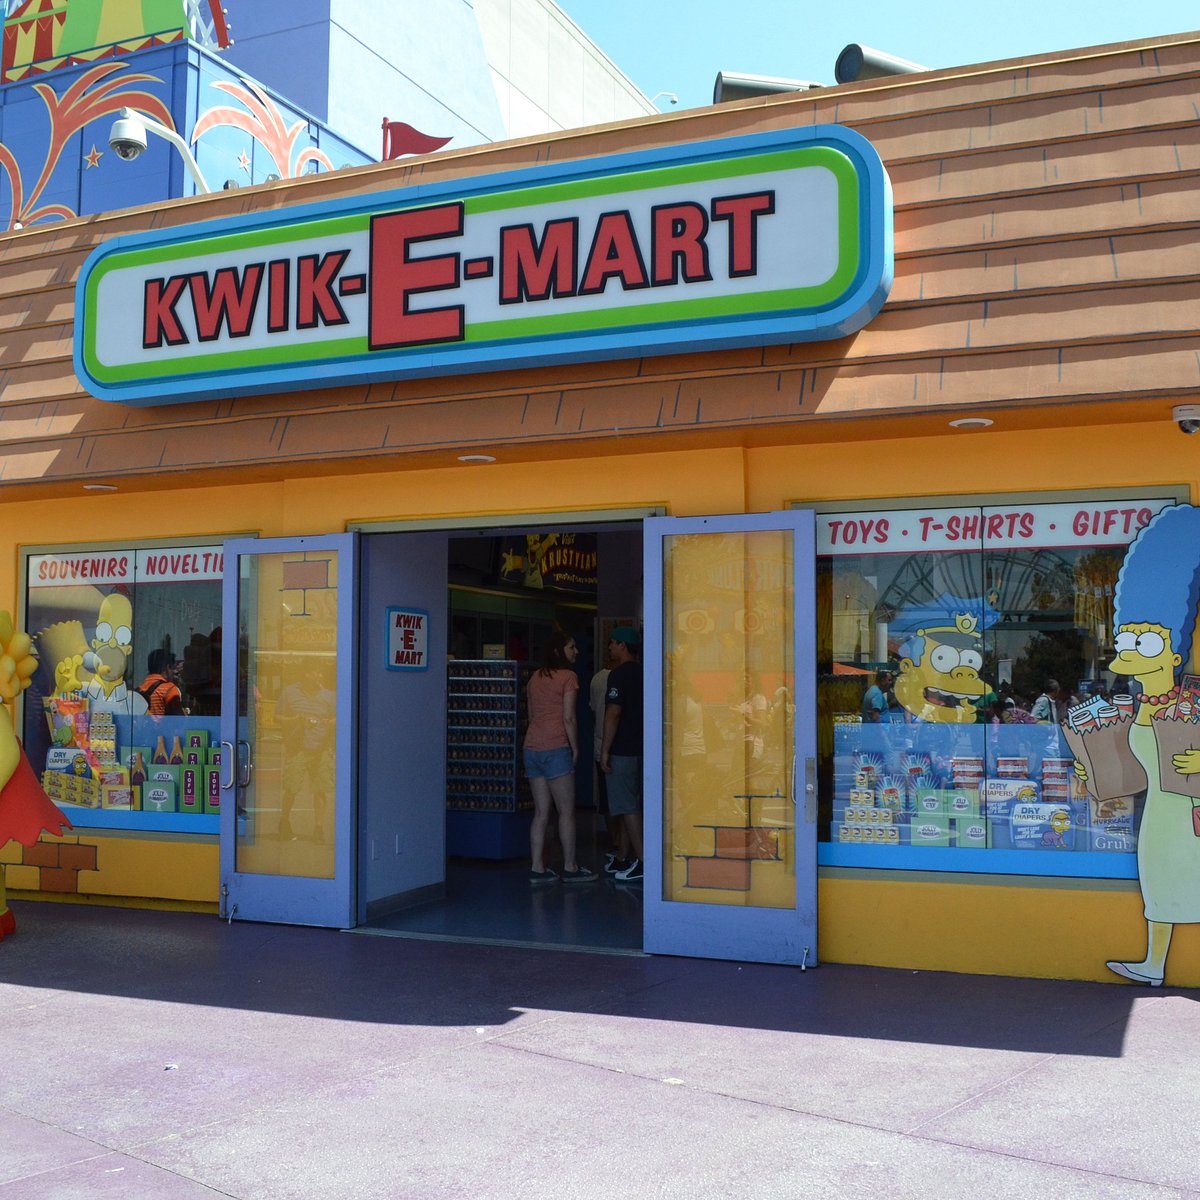 Welcome To The Real-Life Kwik-E-Mart